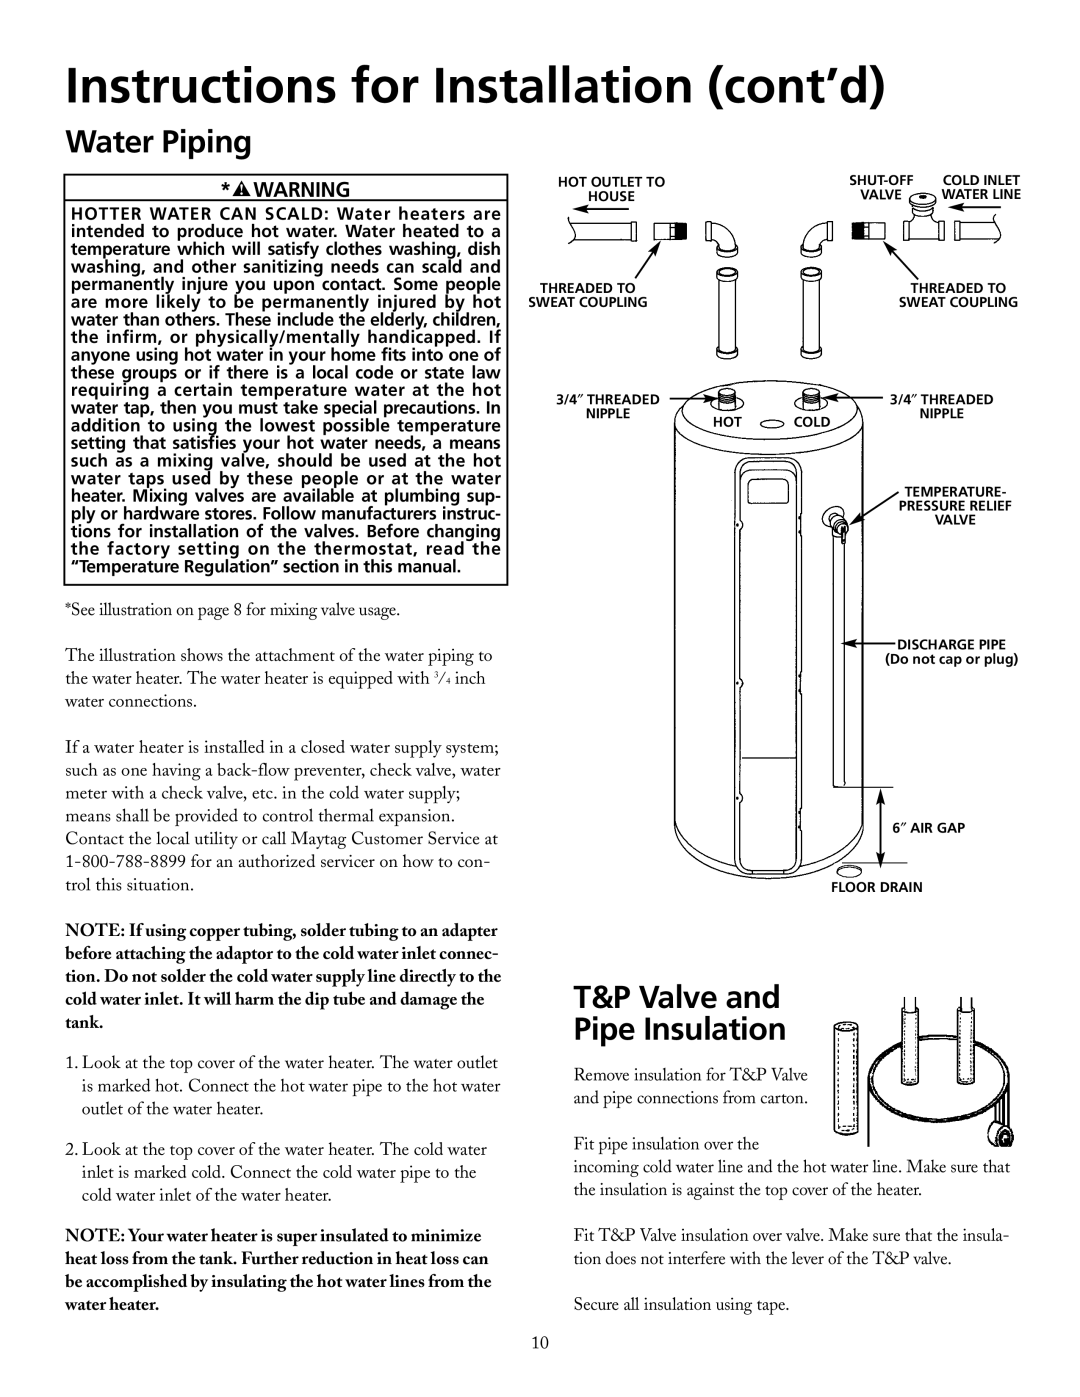 Maytag HRE21250PC, HRE21282PC manual Water Piping, T&P Valve and Pipe Insulation, Instructions for Installation cont’d 